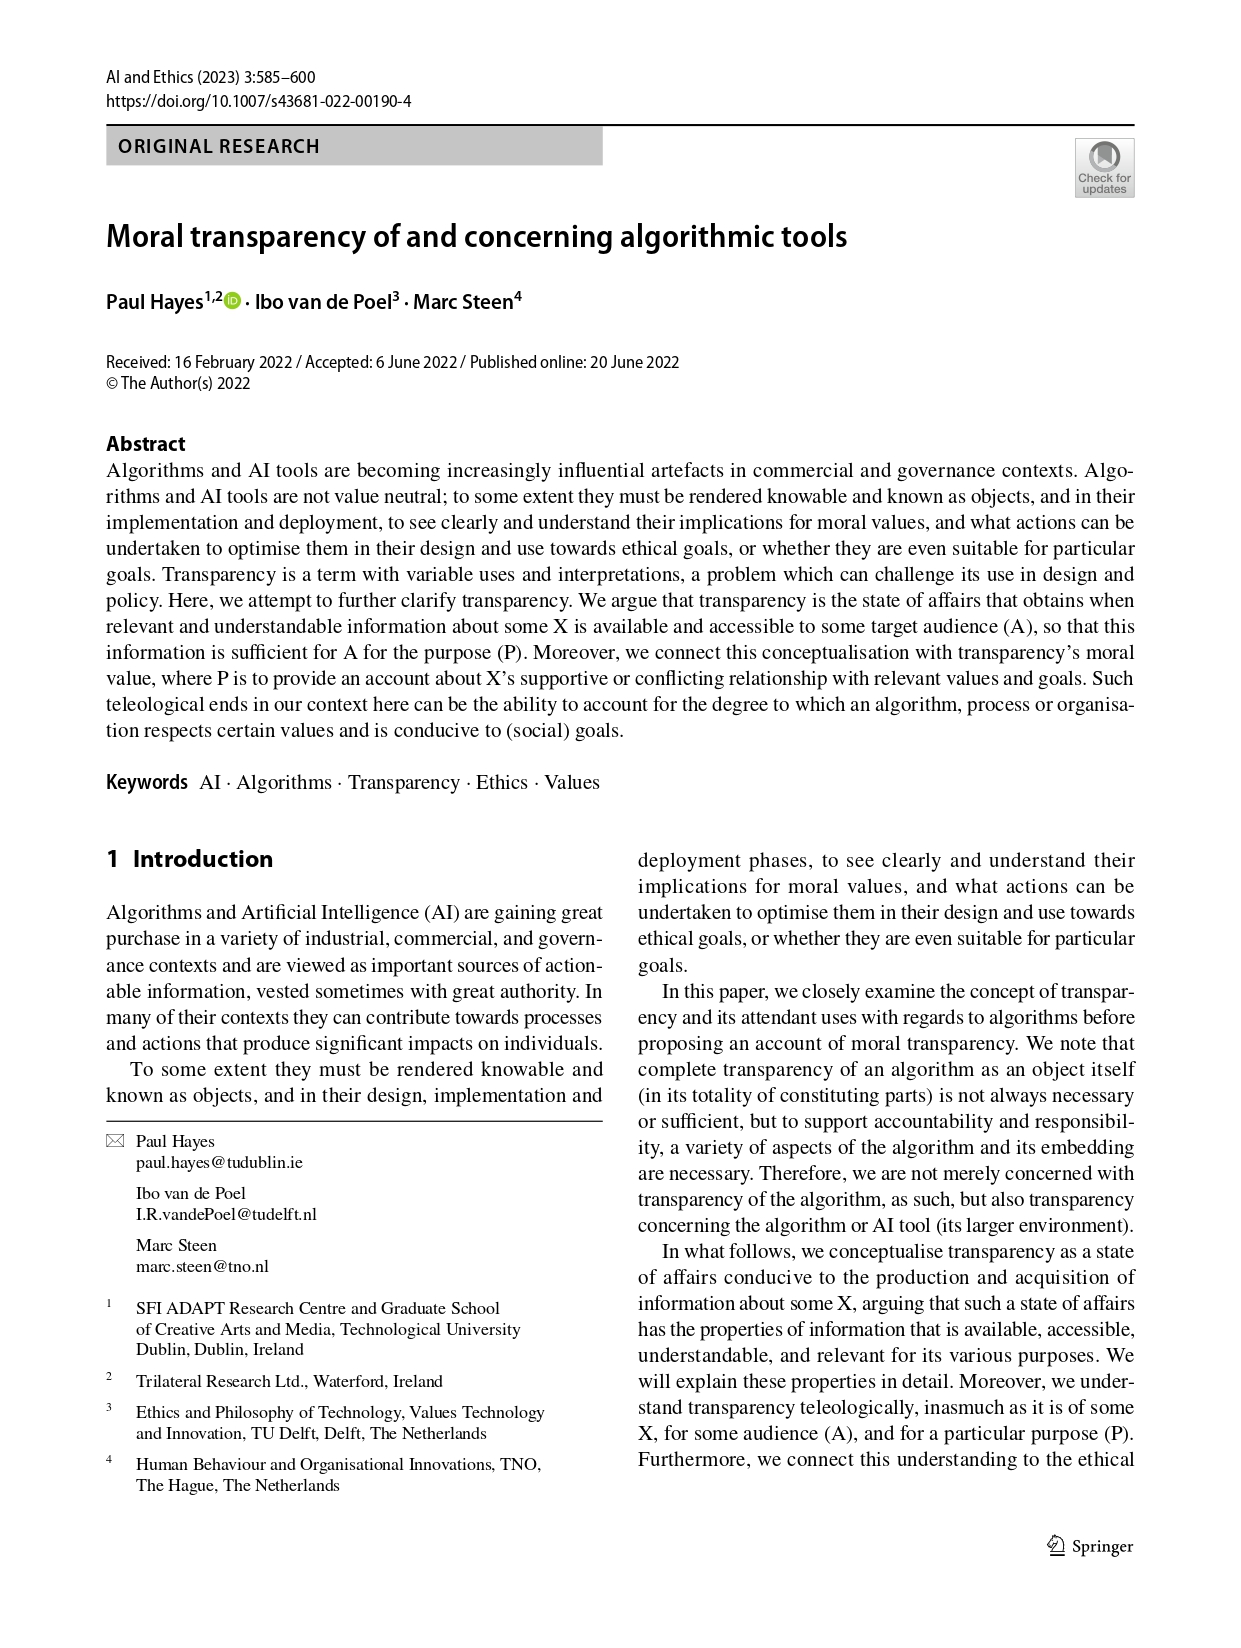 Moral transparency of and concerning algorithmic tools